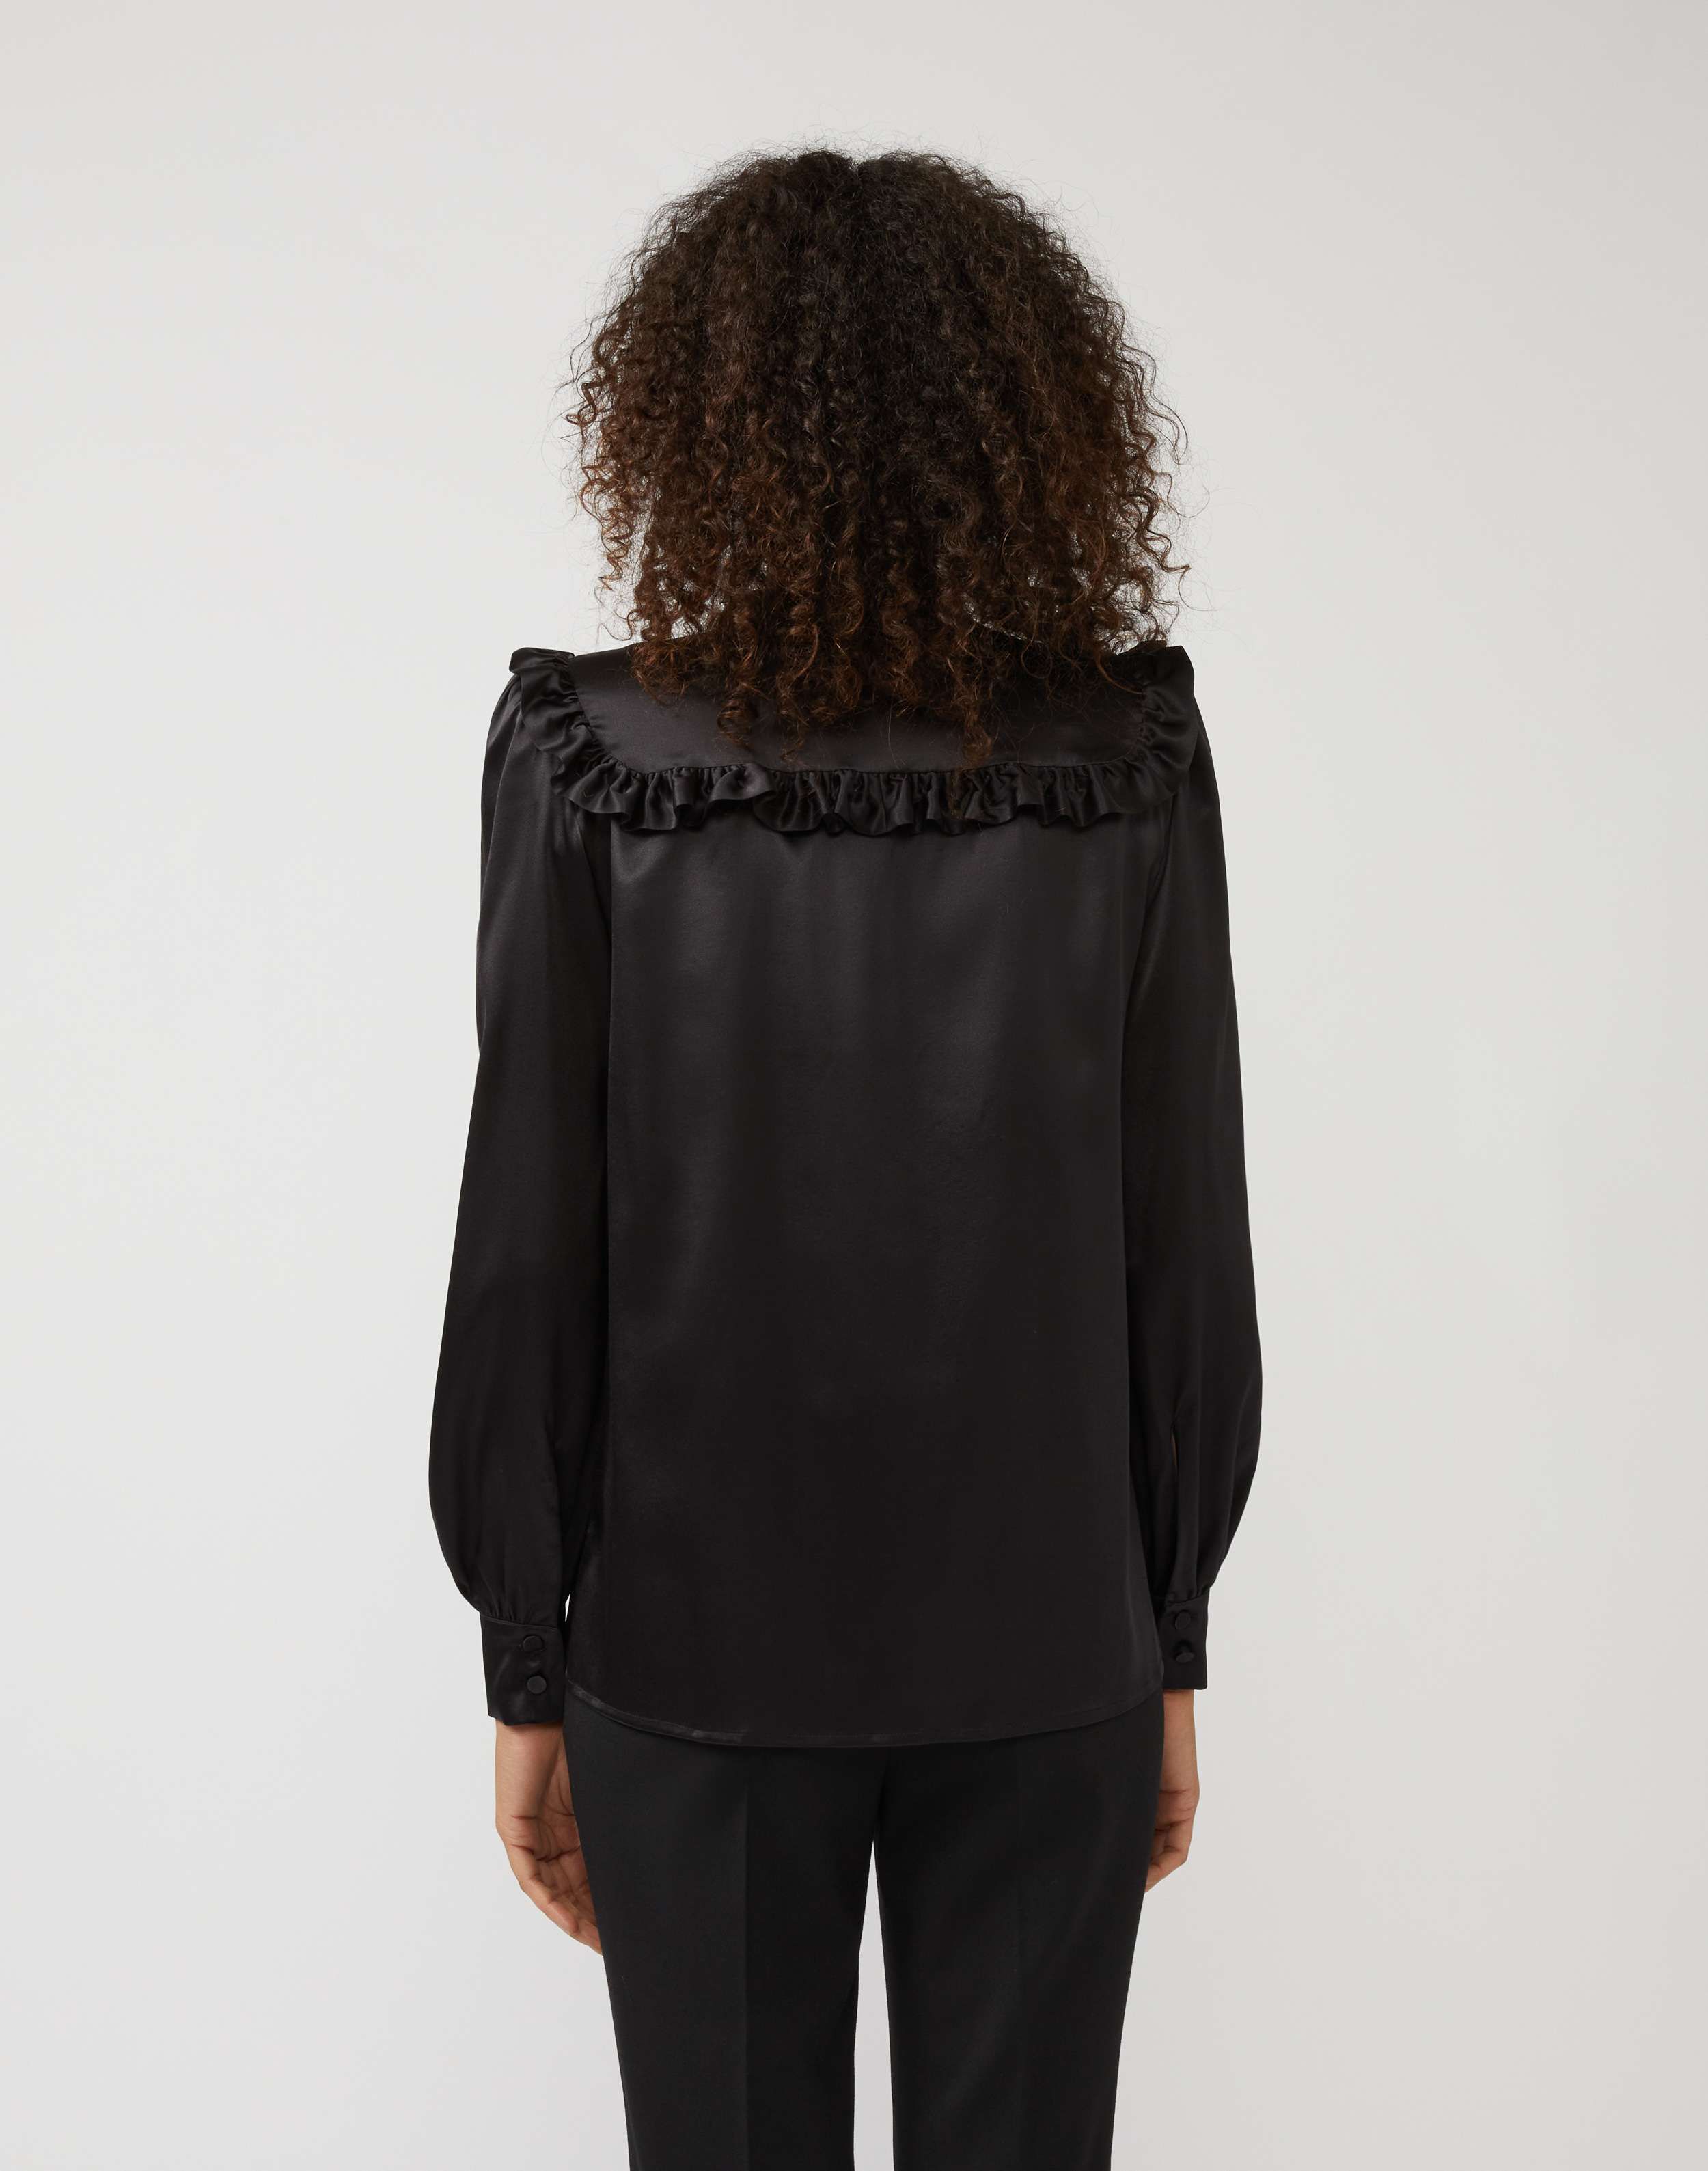 Shirt in black silk with ruffles and bow detail